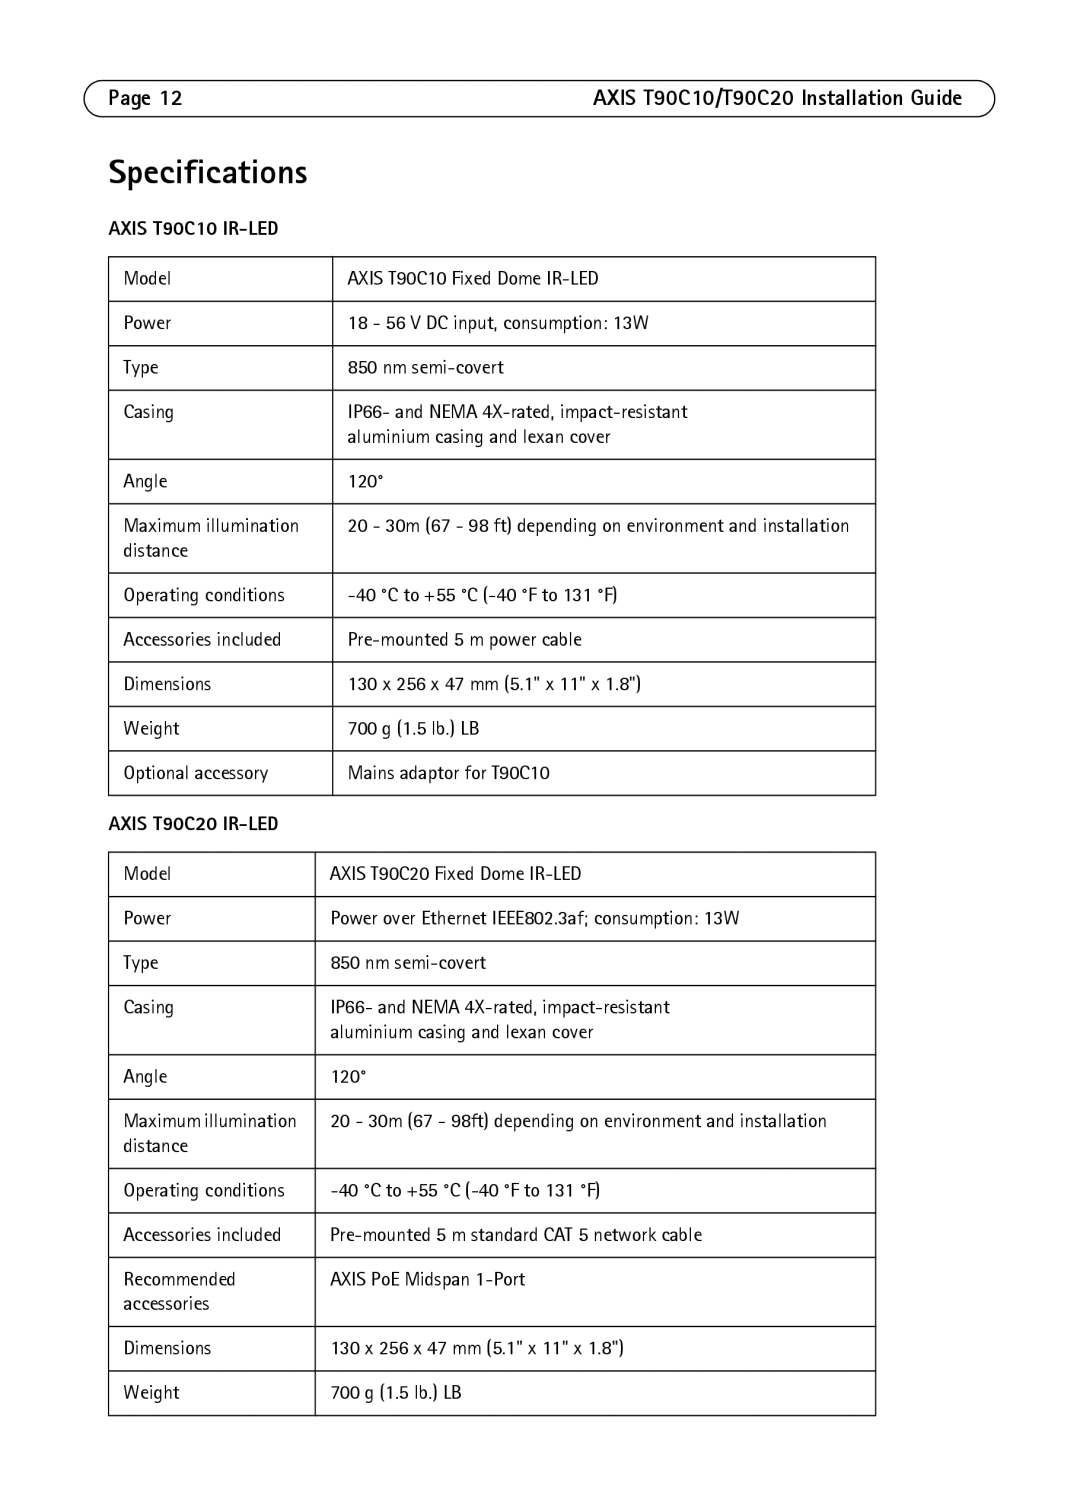 Axis Communications manual Specifications, Page 12AXIS T90C10/T90C20 Installation Guide, AXIS T90C10 IR-LED 